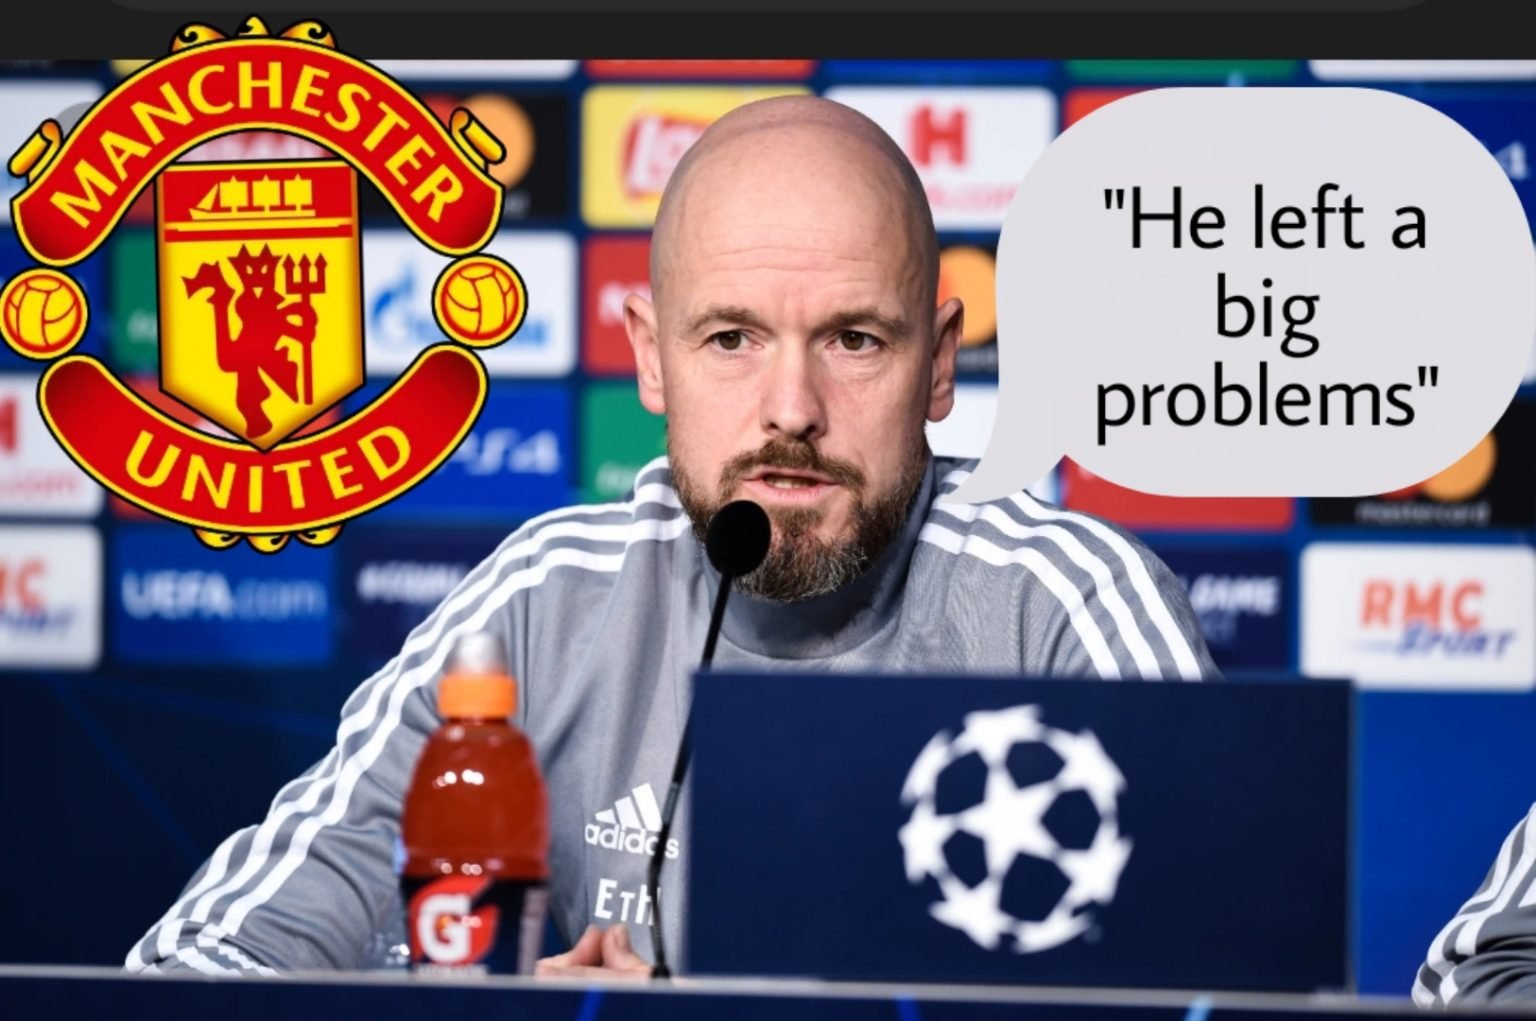 "He is to blame for every issue we have right now": Erik ten Hag names the former manager of Man United who left him with major issues that are currently harming the team.